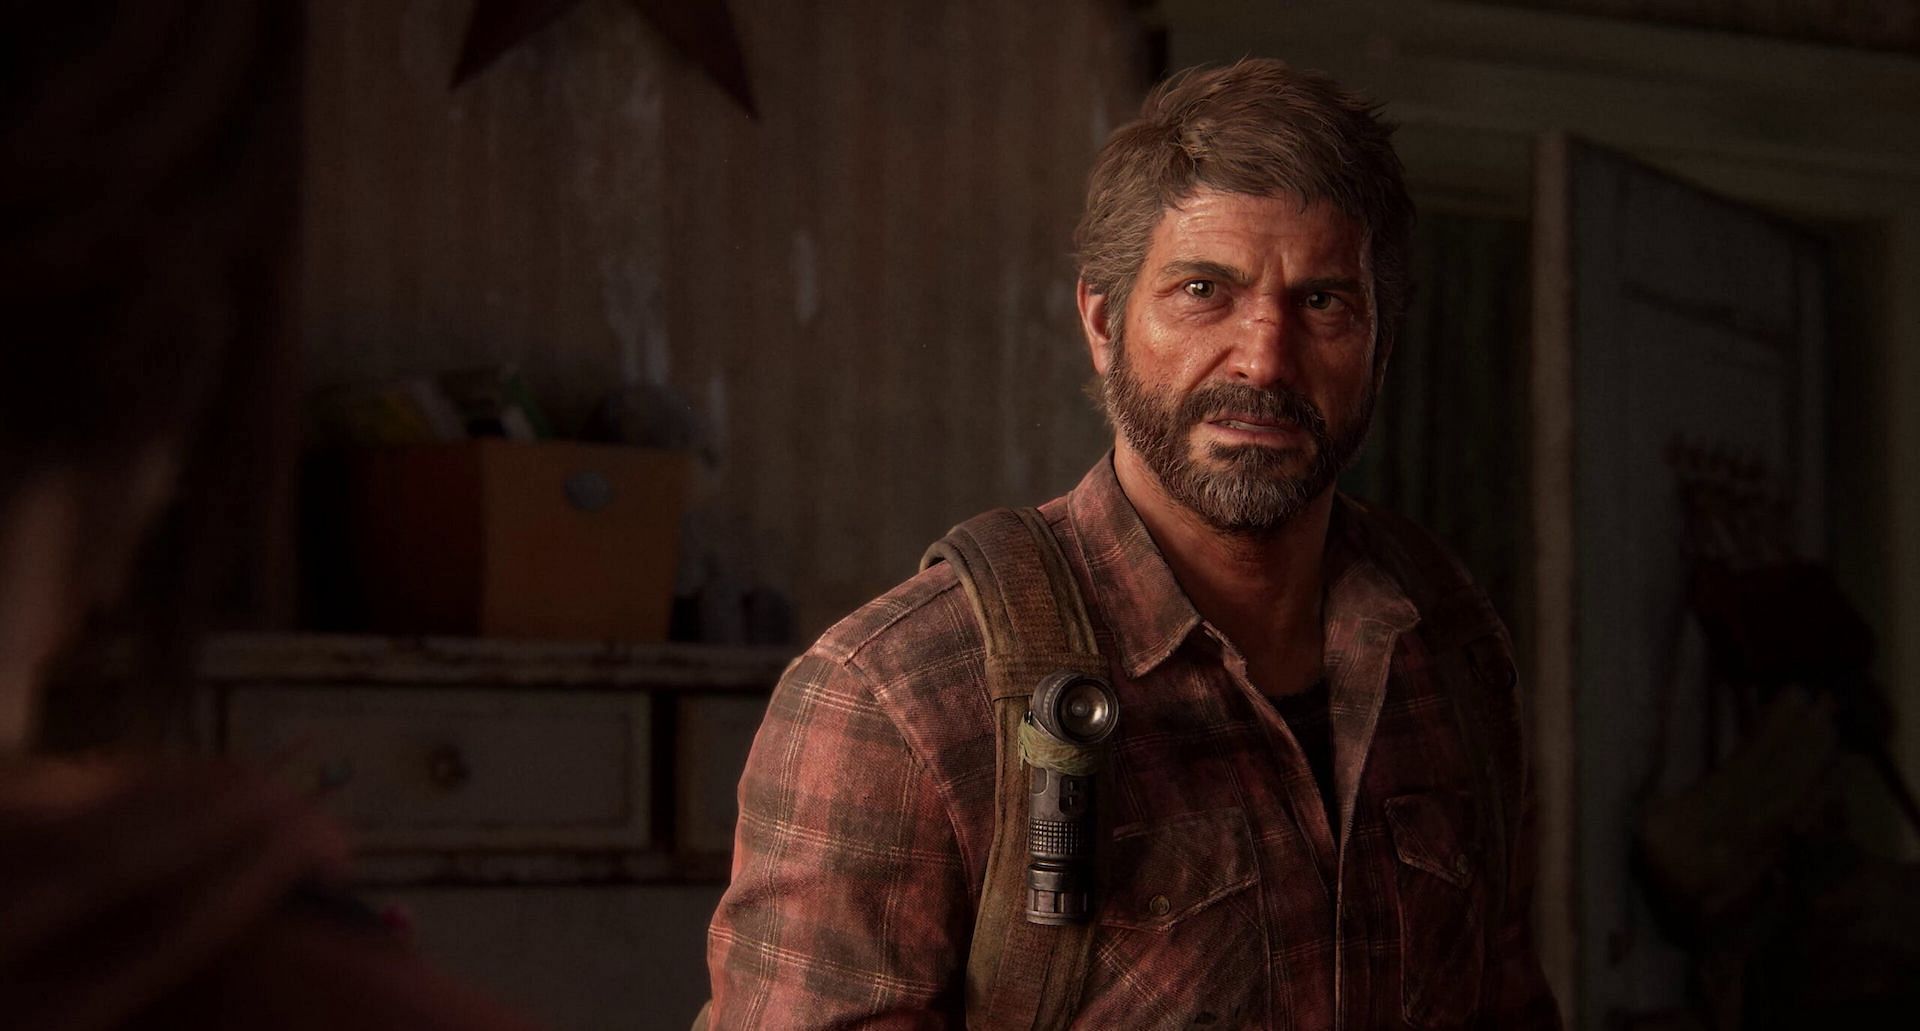 The Last Of Us PC Port Is Finally Happening: What You Need To Know